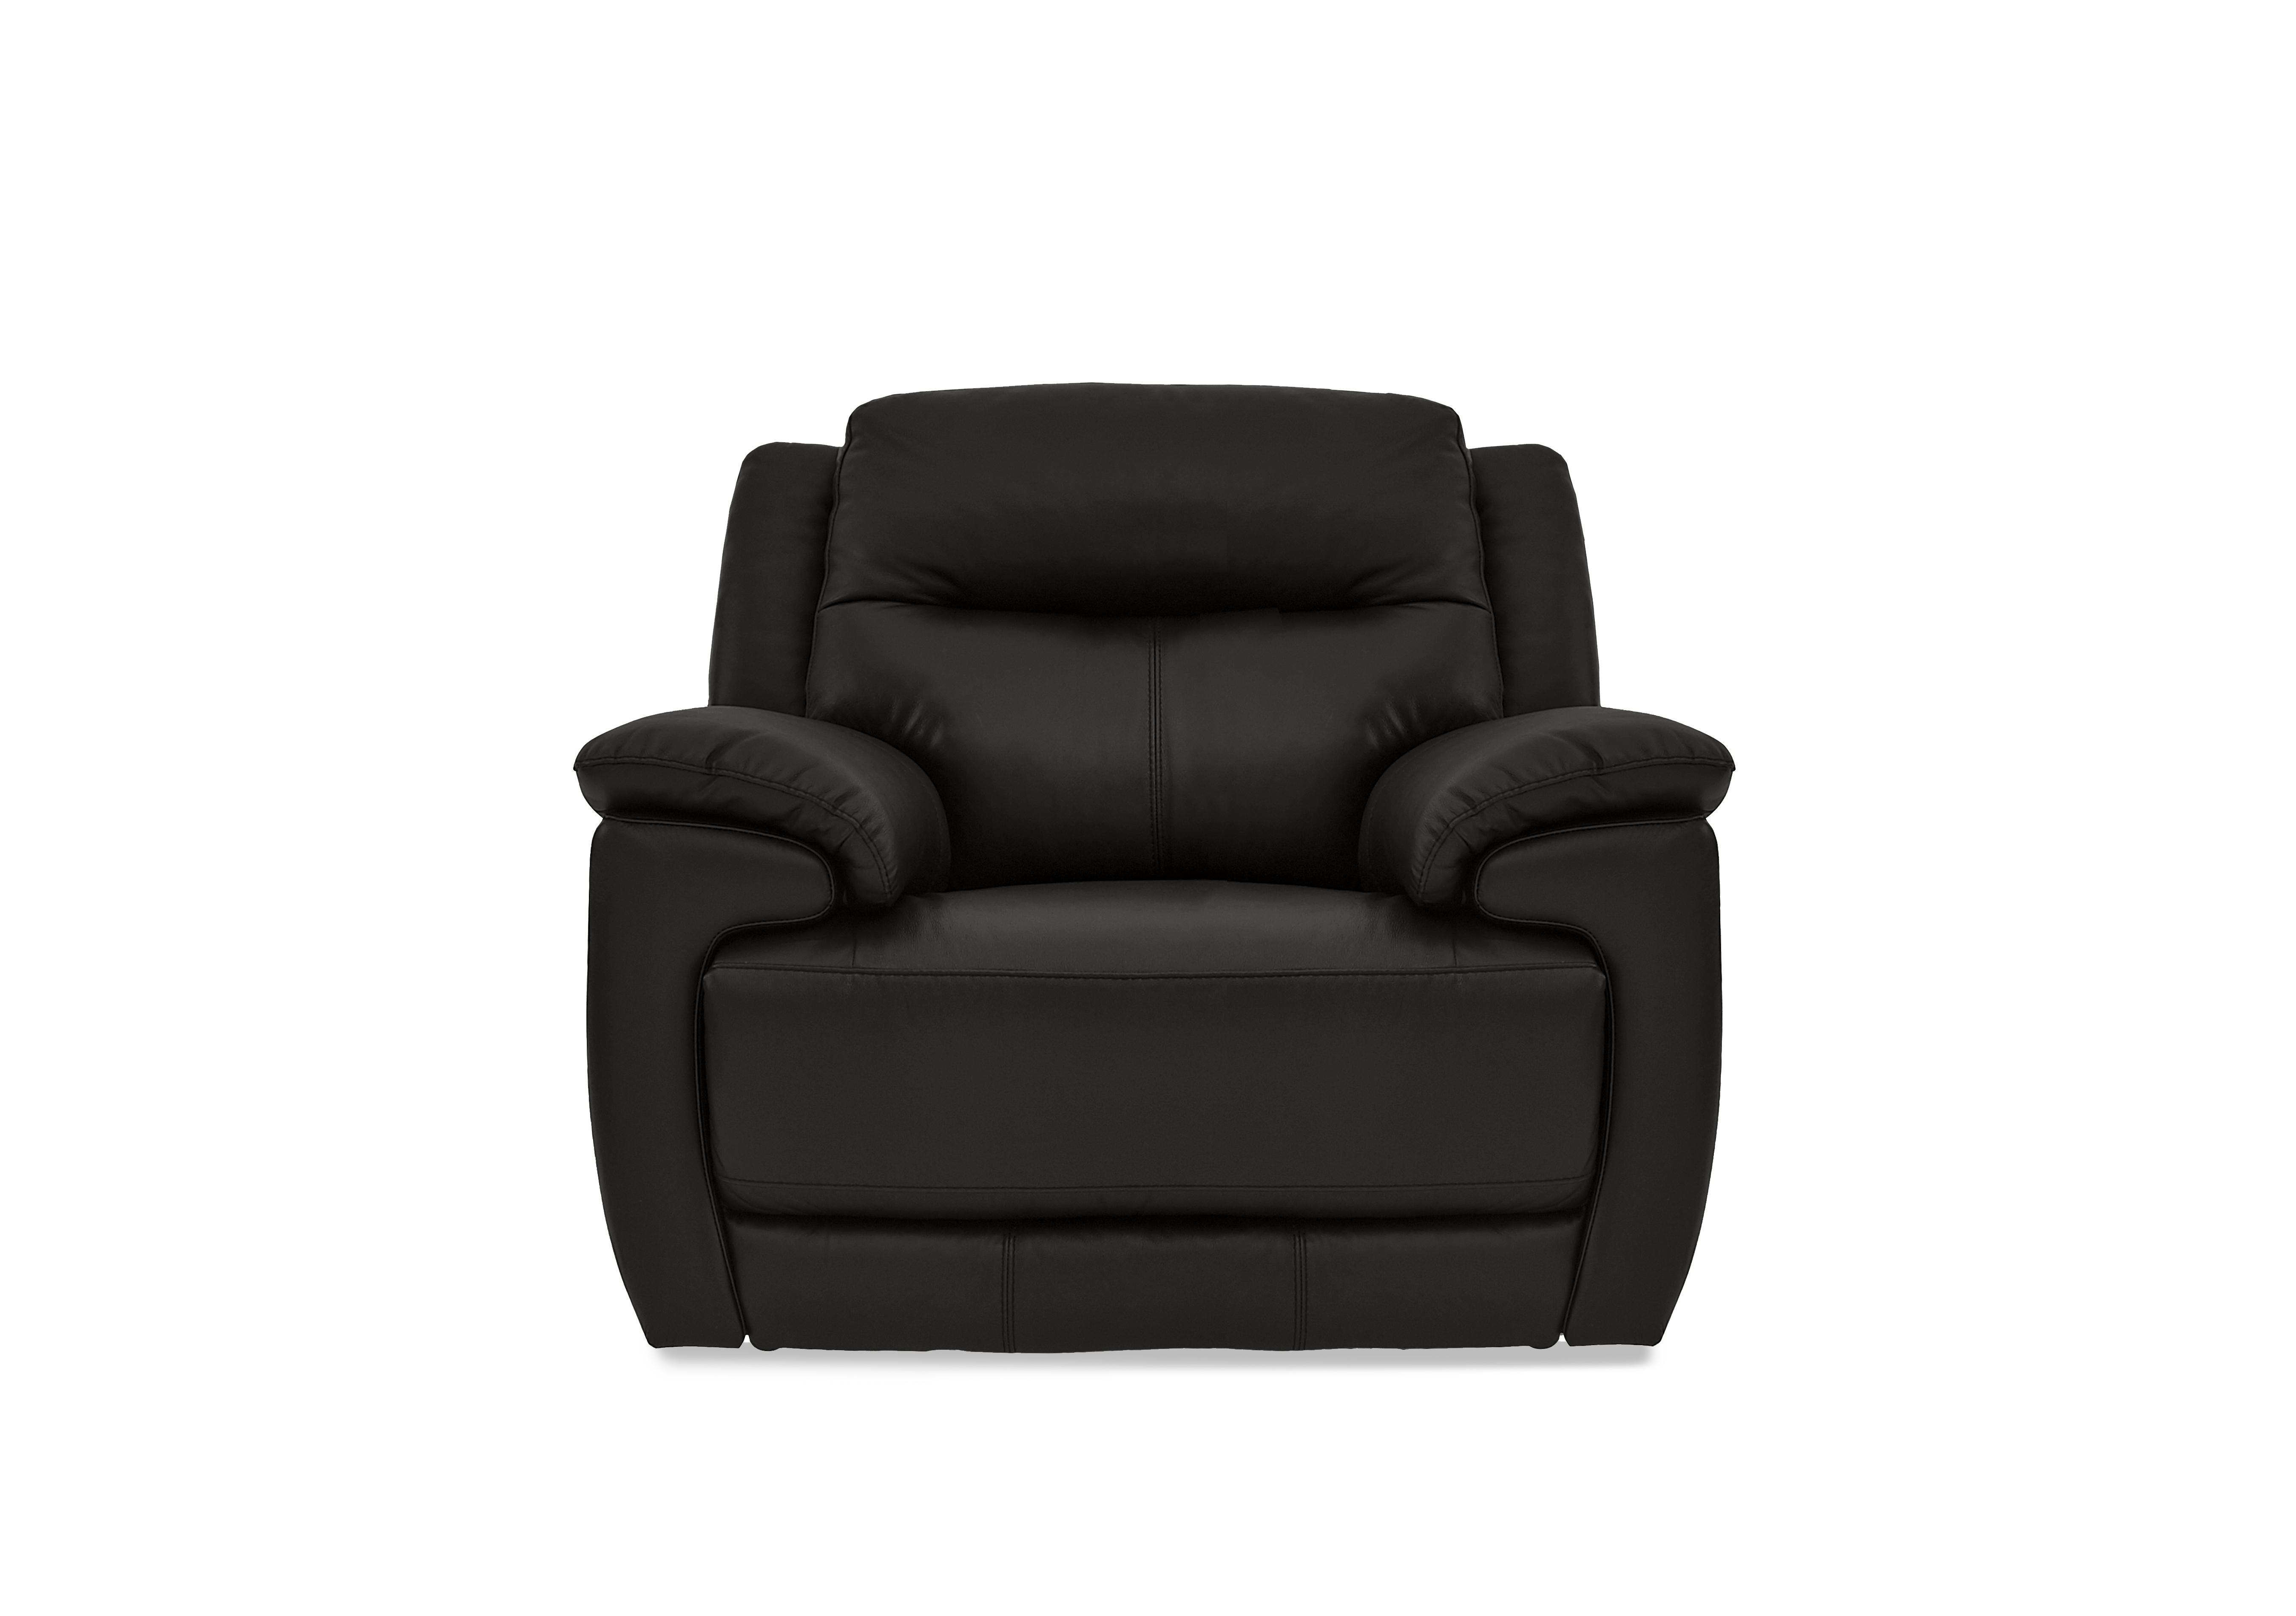 Touch Leather Armchair in Bv-3500 Classic Black on Furniture Village